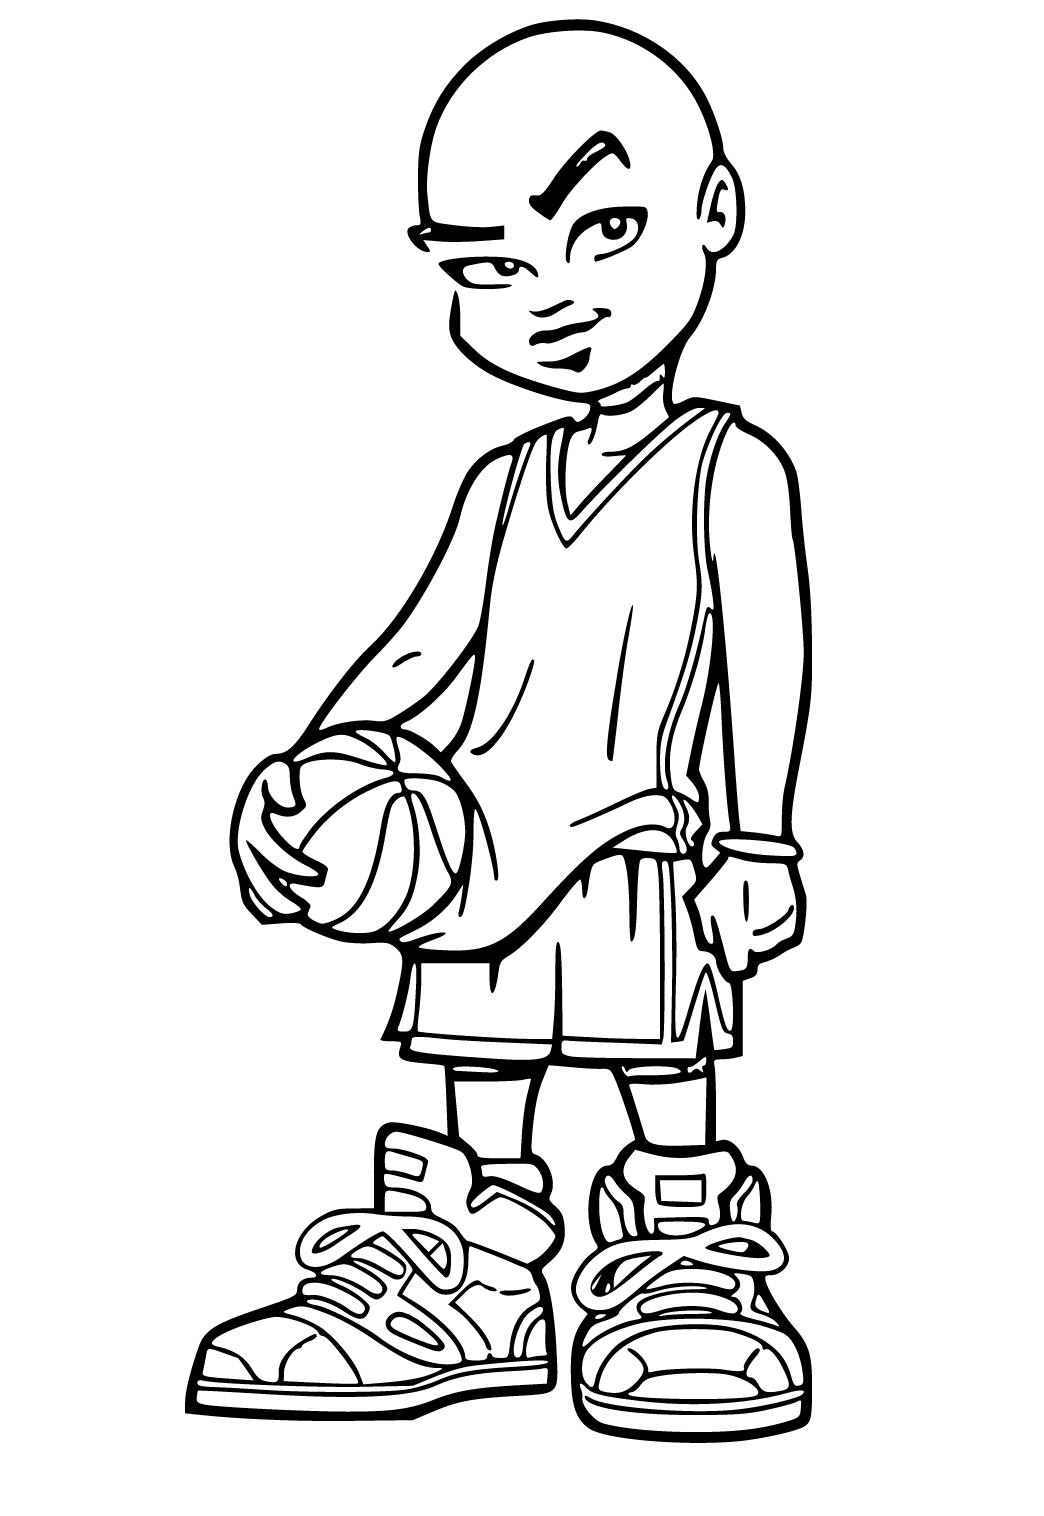 Free Printable Michael Jordan Cute Coloring Page for Adults and Kids